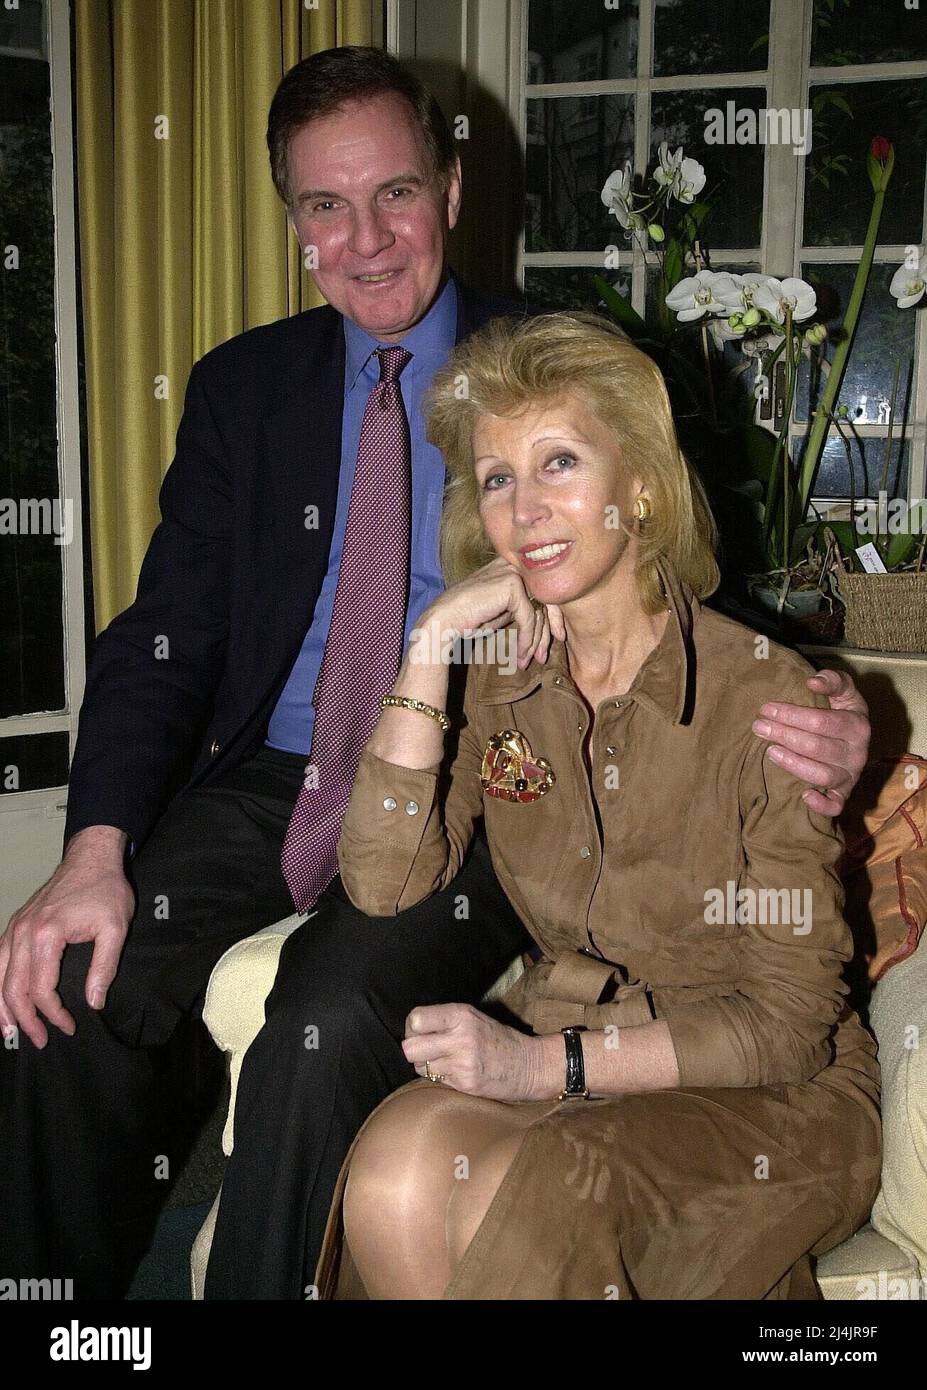 File photo dated 30/12/02 of former Tory minister Jonathan Aitken with Elizabeth Harris in central London, after it was announced that they were to marry. Welsh socialite Elizabeth Harris, who was married to a former Conservative Cabinet minister Jonathan Aitken, died at the Chelsea and Westminster Hospital at 11.10pm on Good Friday after a long illness. The one-time Rank starlet was previously married to actor Richard Harris, with whom she had three sons Damian, Jared and Jamie, who are all Hollywood-based actors or directors. Issue date: Saturday April 16, 2022. Stock Photo